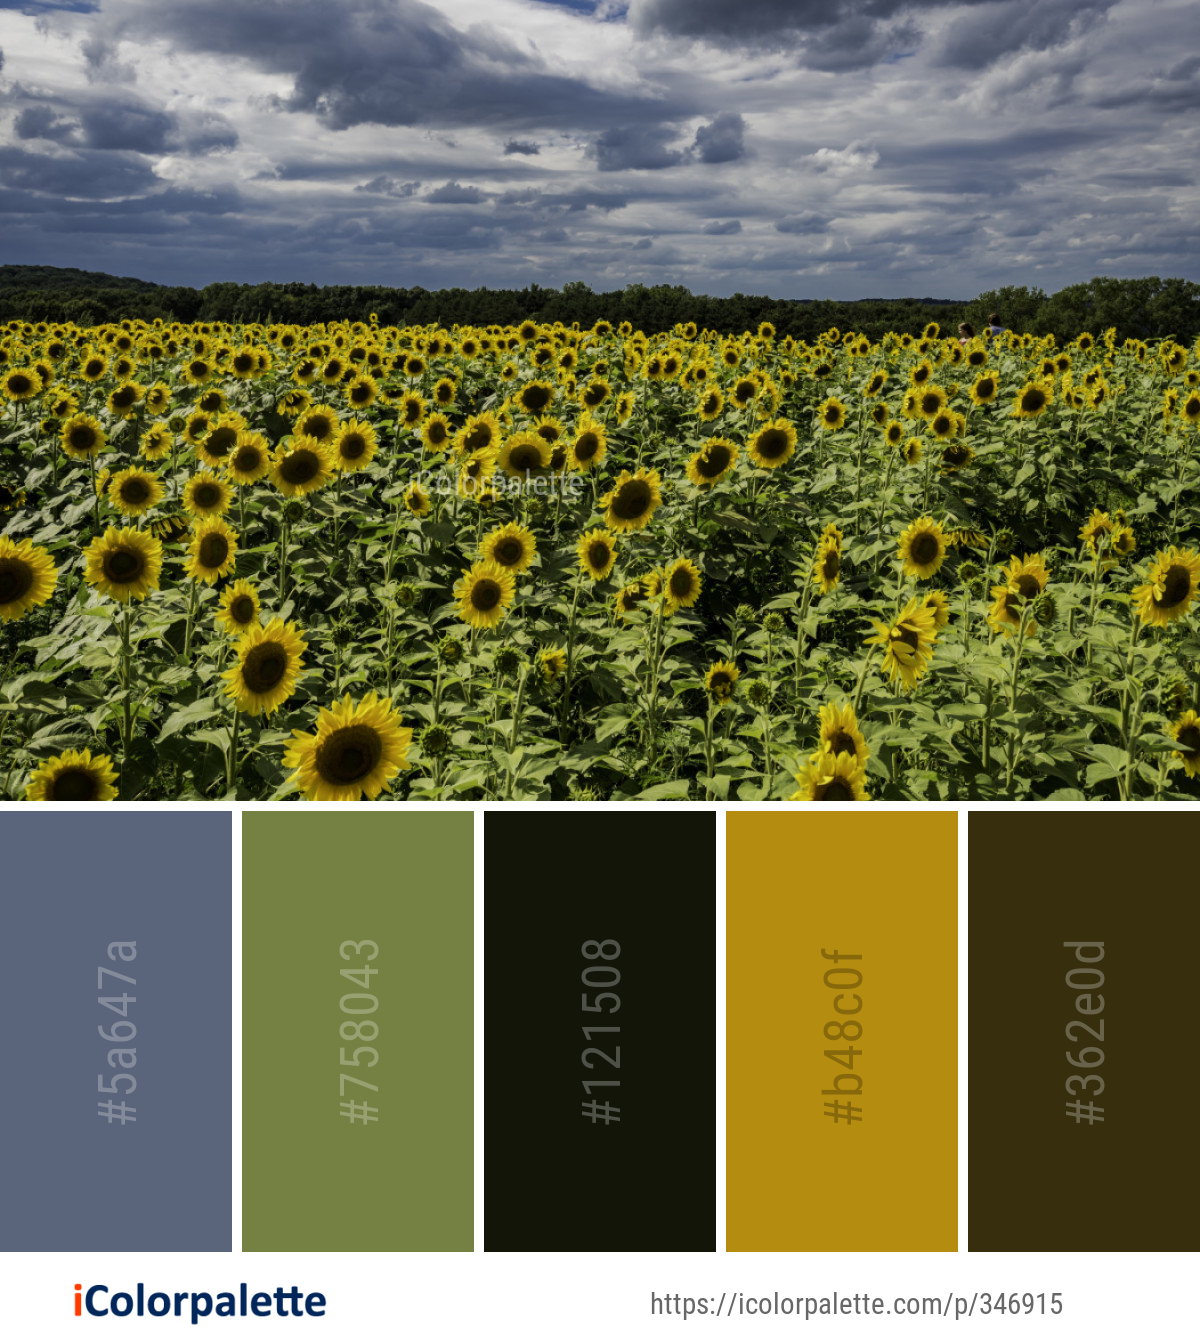 Color Palette Ideas from Flower Sunflower Field Image